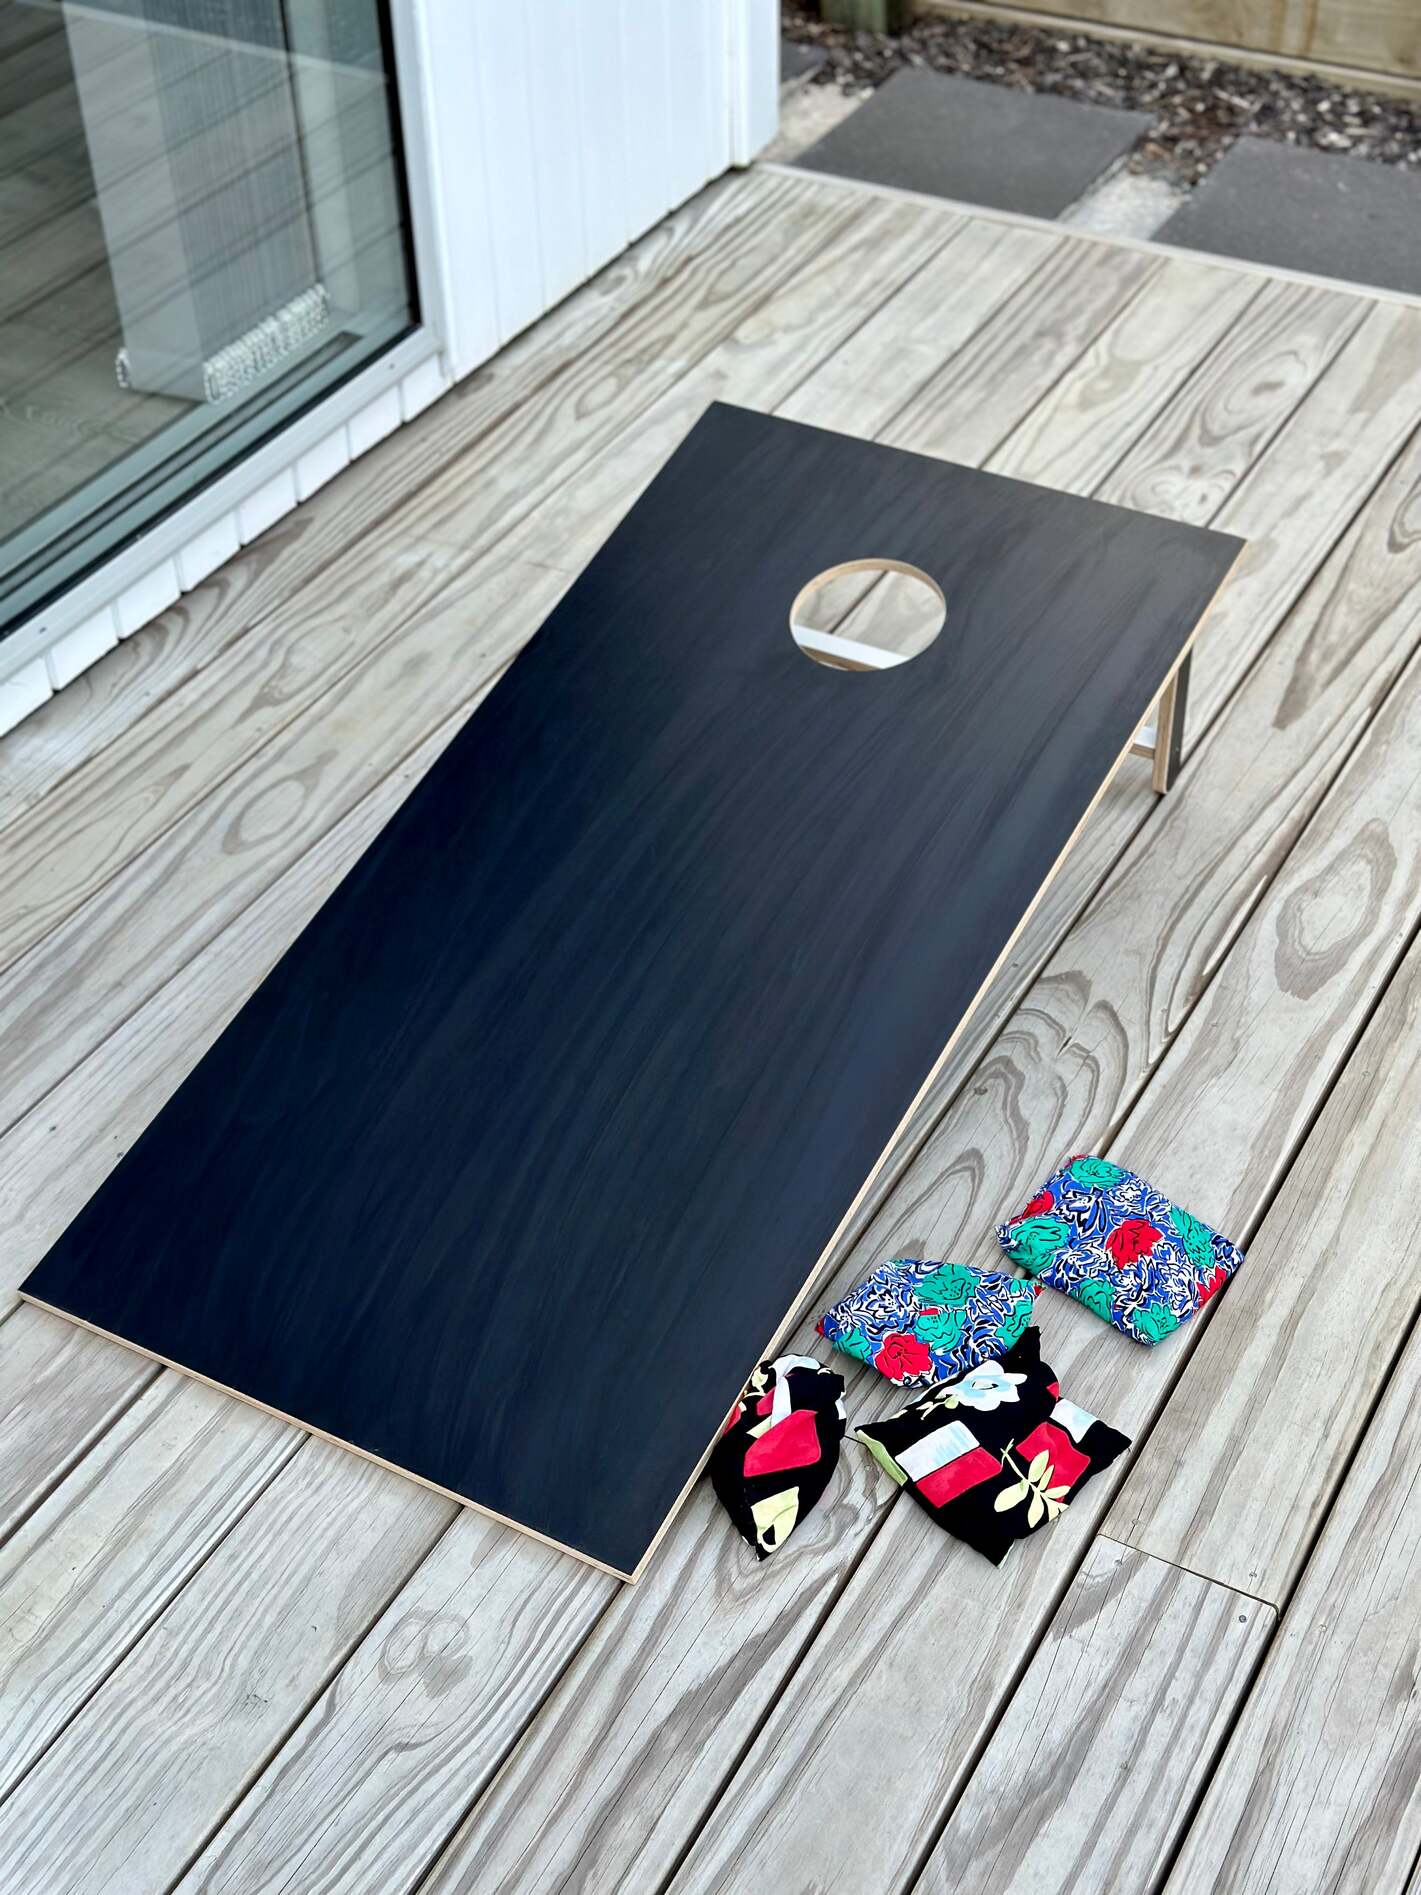 Get your game on with our Cornhole board. Perfect for indoor and outdoor fun for all ages.